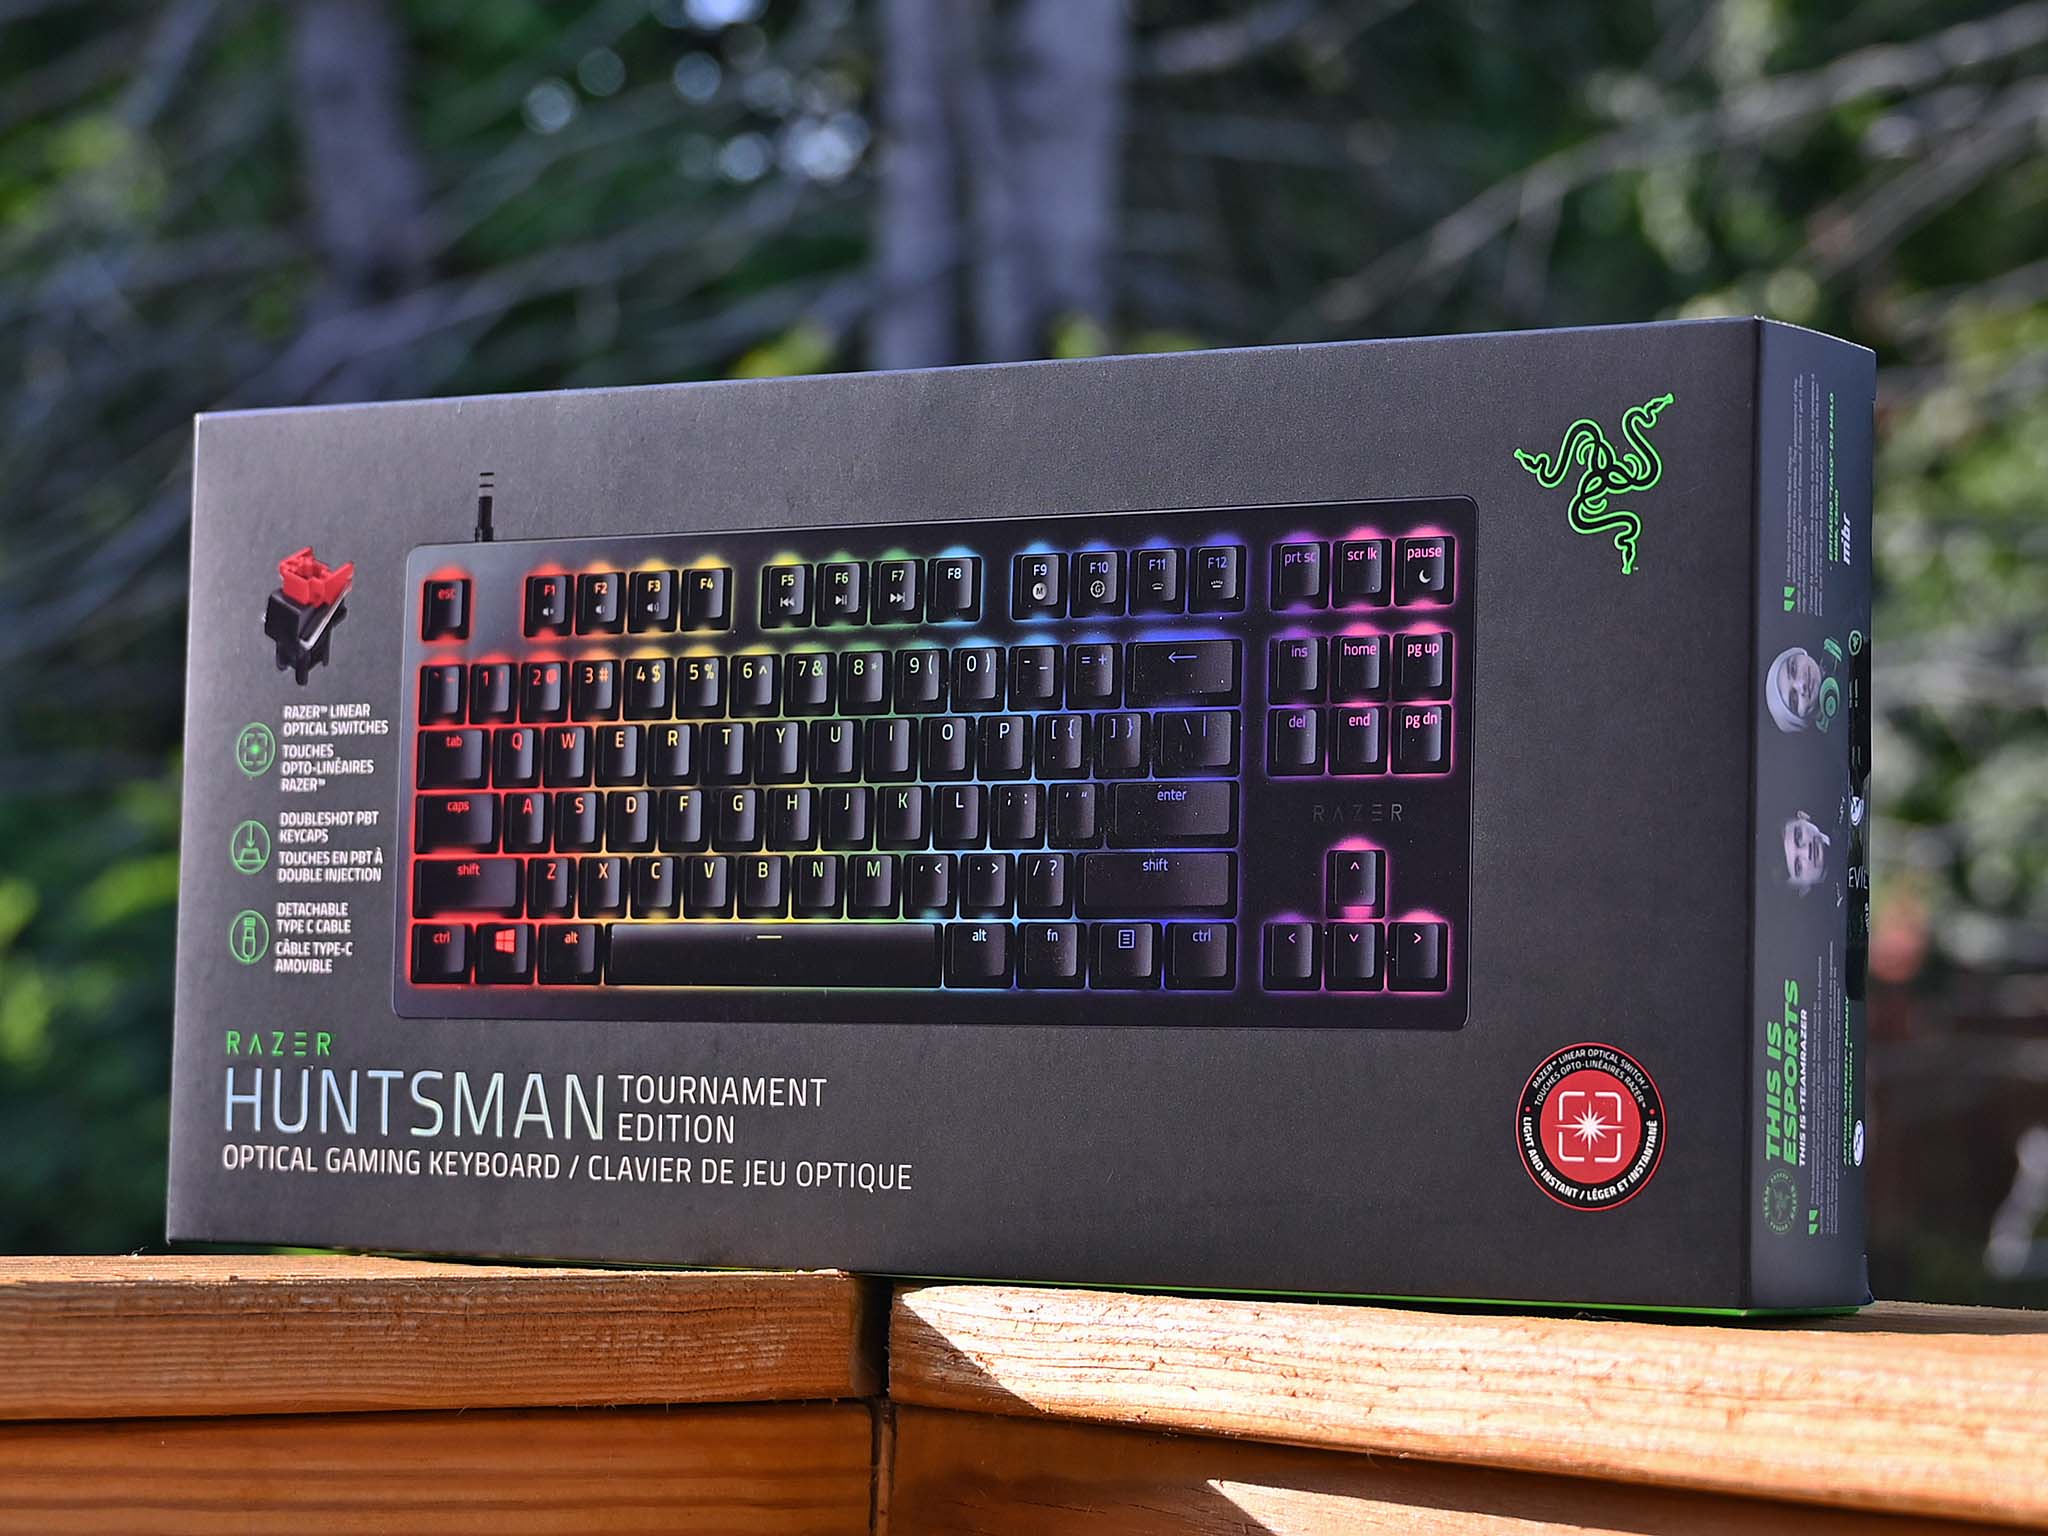 Razer Huntsman Tournament Edition review: A gaming keyboard that's